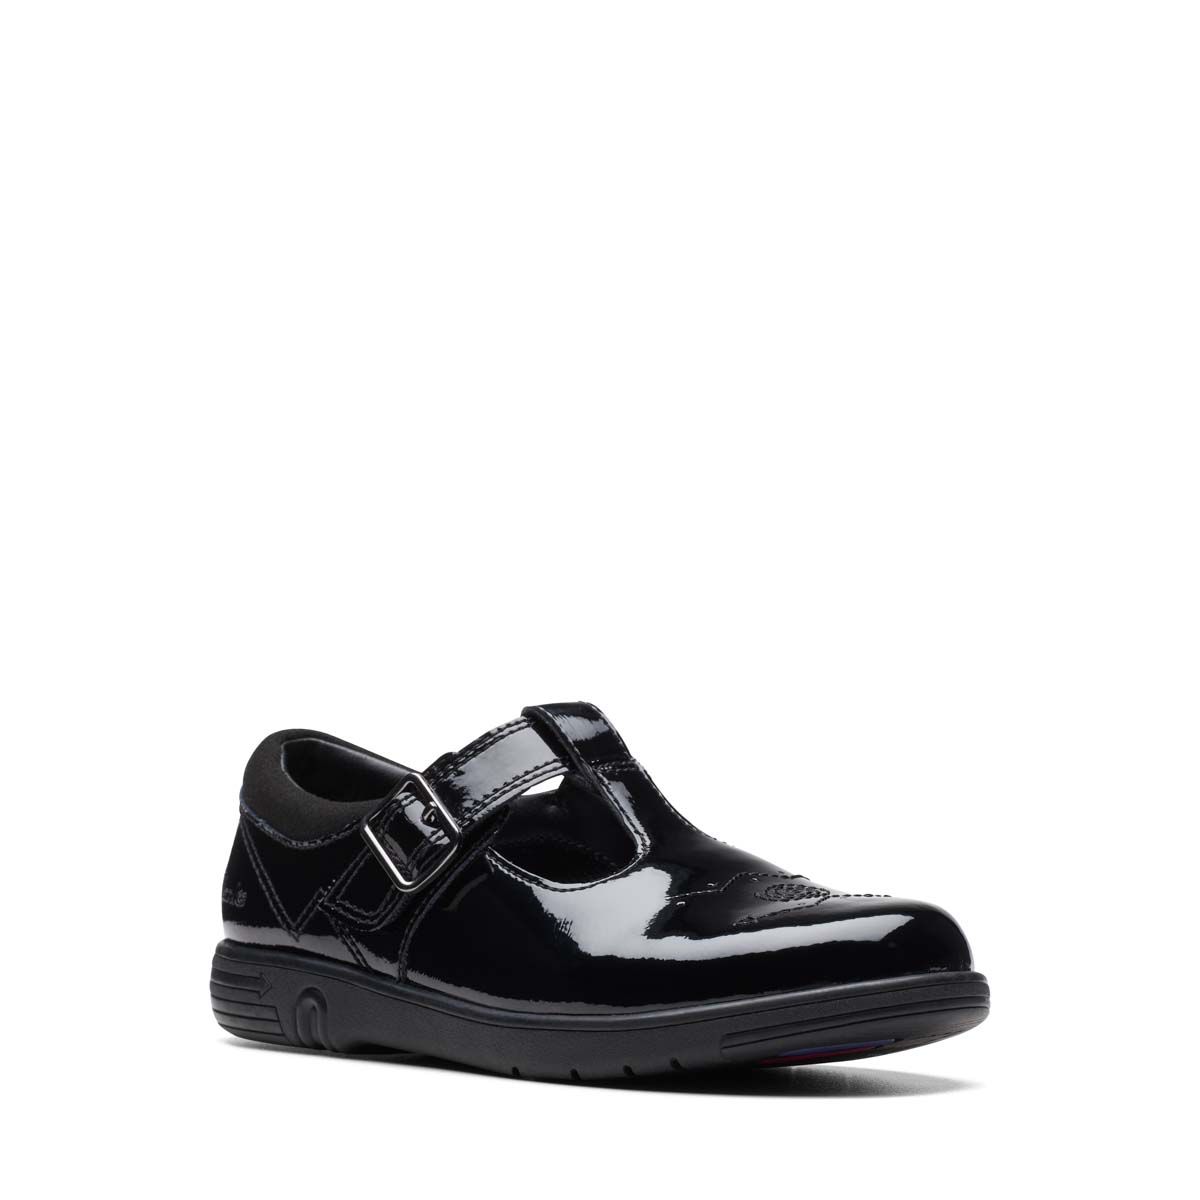 Clarks Jazzy Tap T Bar Black Patent Kids Girls School Shoes 753076F In Size 10.5 In Plain Black Patent F Width Fitting Regular Fit For School For kids